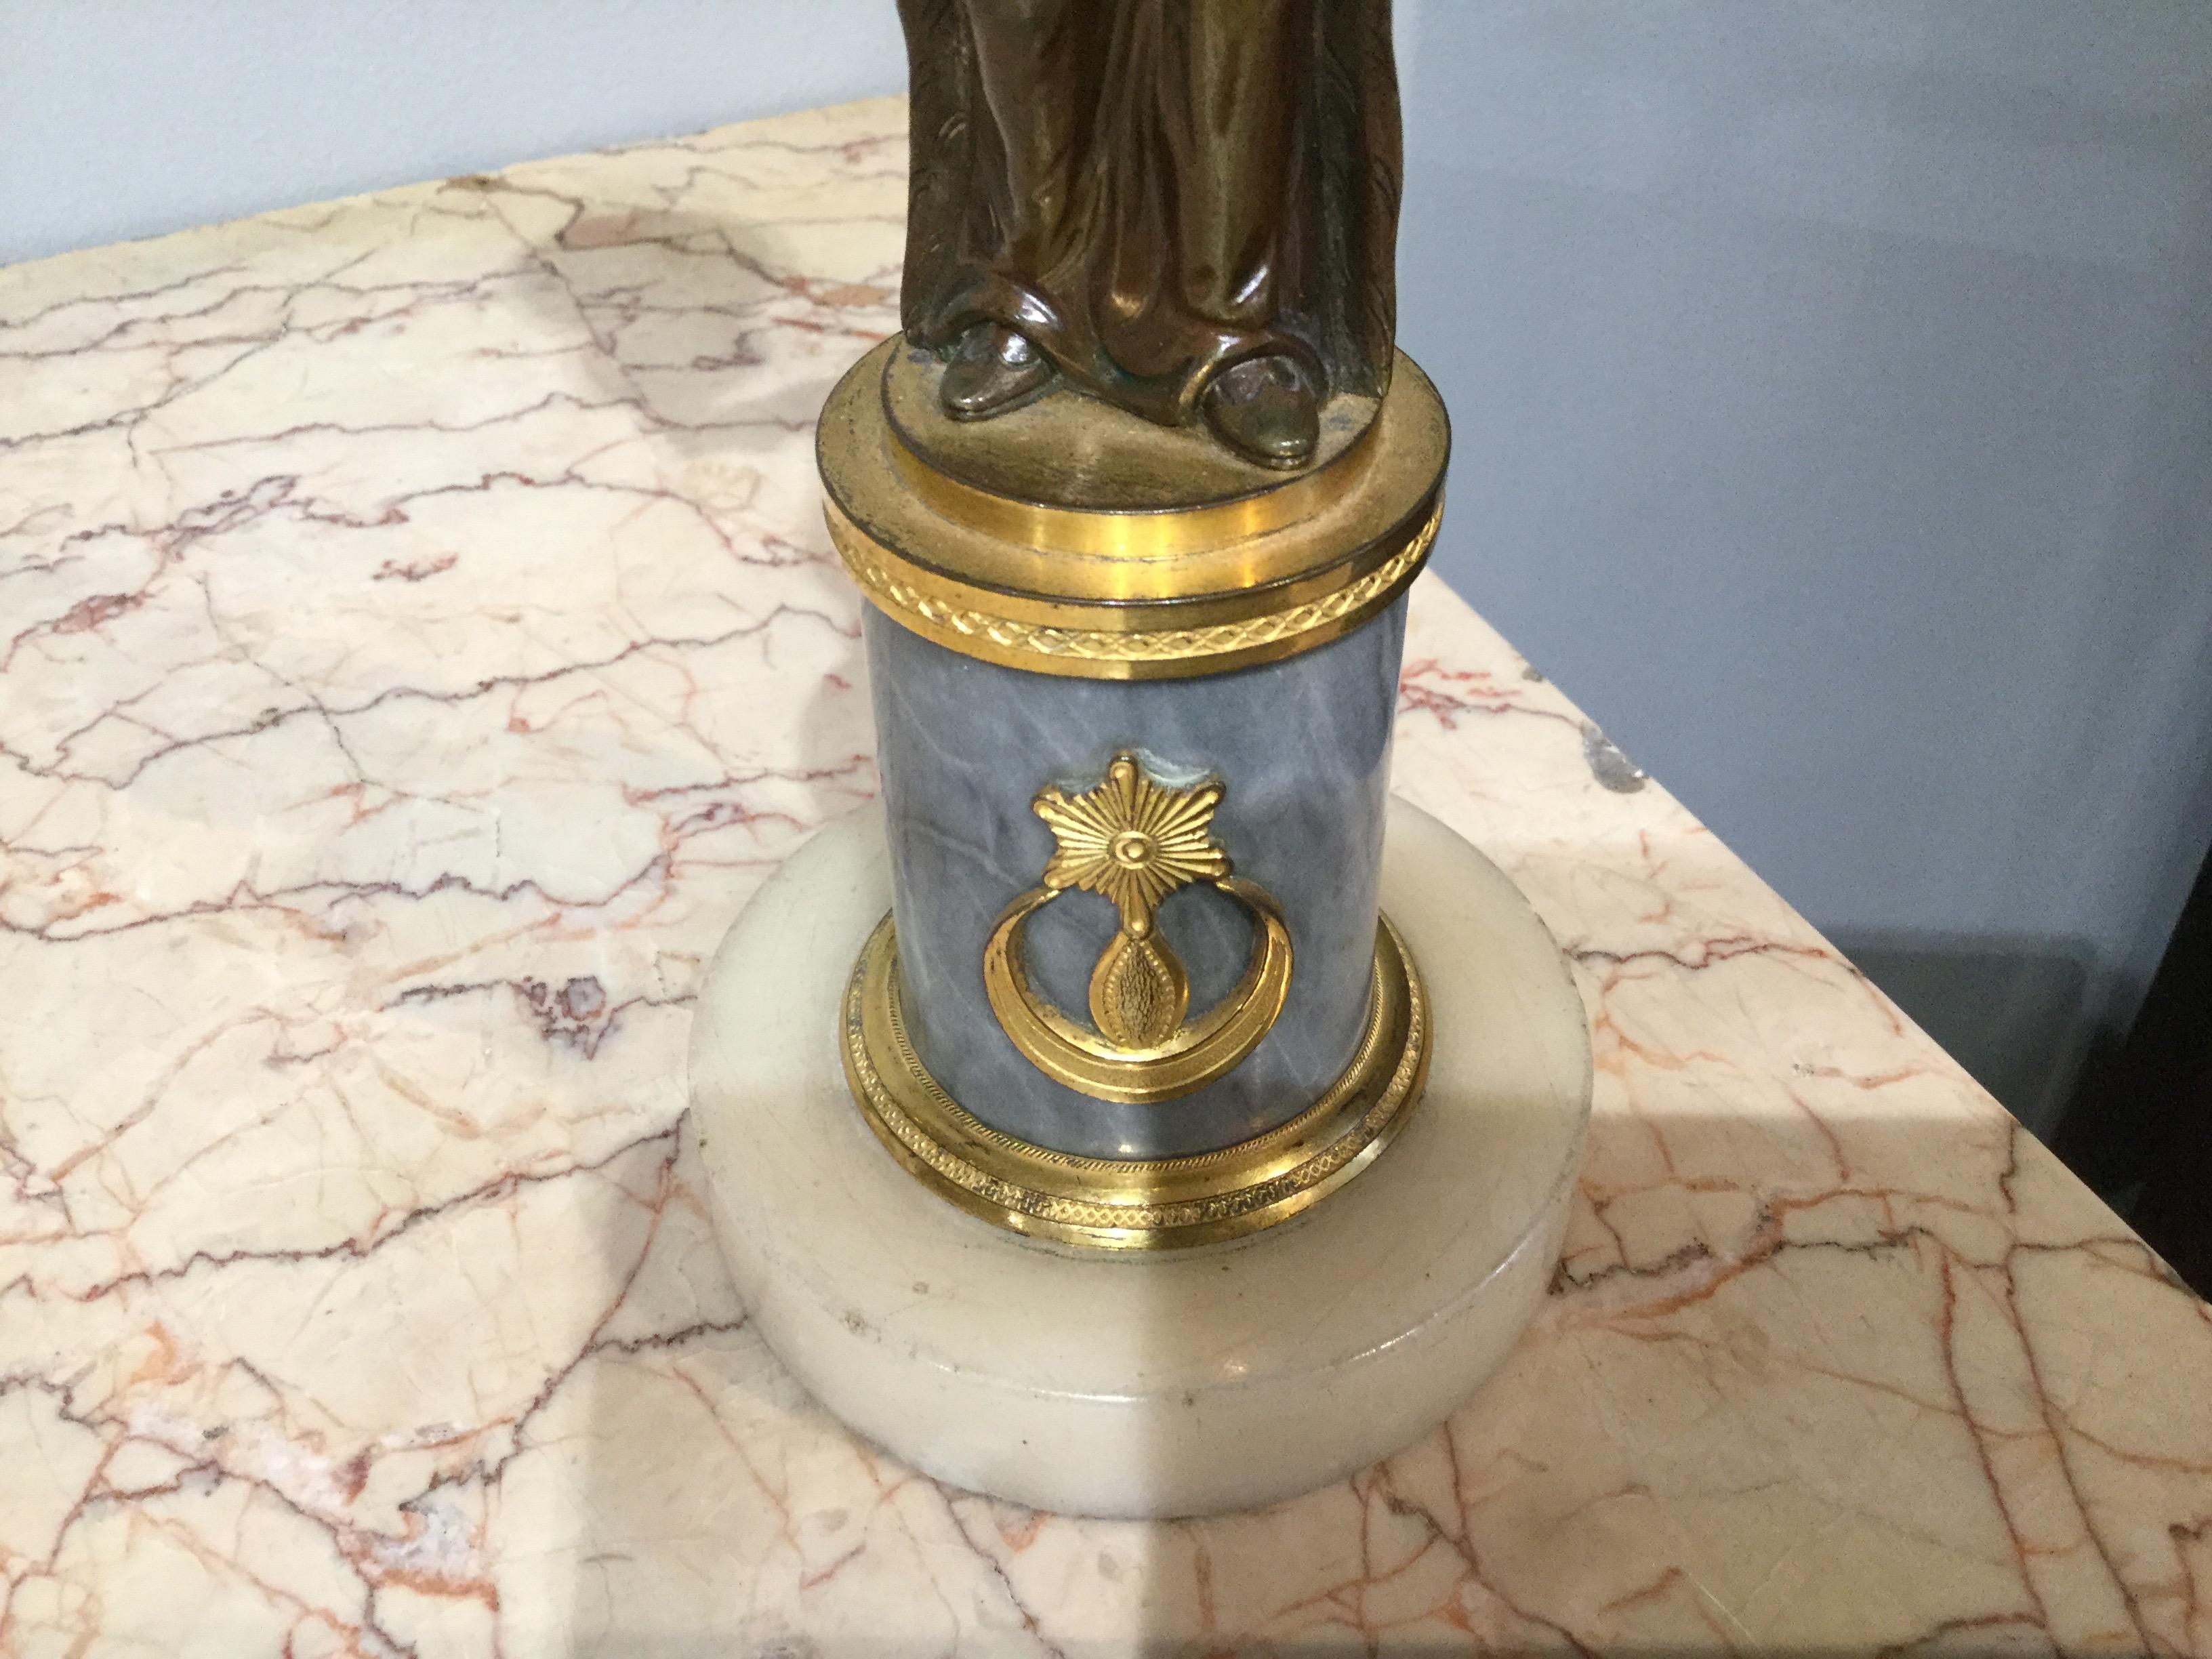 Pair of Regency Period Candlesticks with Bronze Turkish Figures In Good Condition For Sale In Bradford on Avon, GB